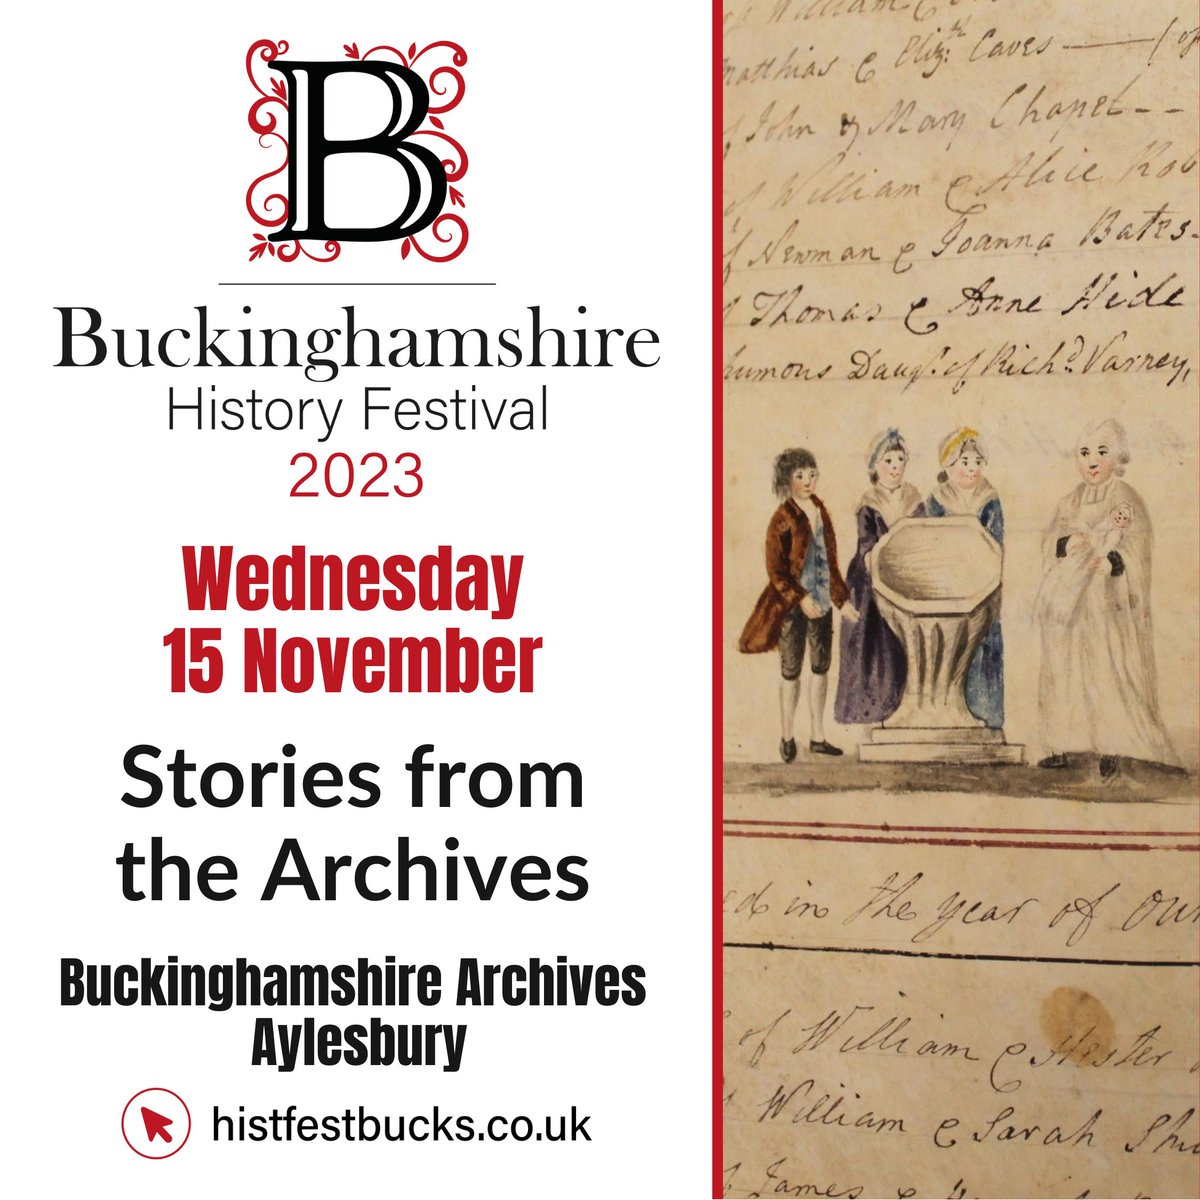 There's still a handful of tickets available for next week's tour at 2pm, Wednesday the 15th of November. Email us at archives@buckinghamshire.gov.uk to book your space!